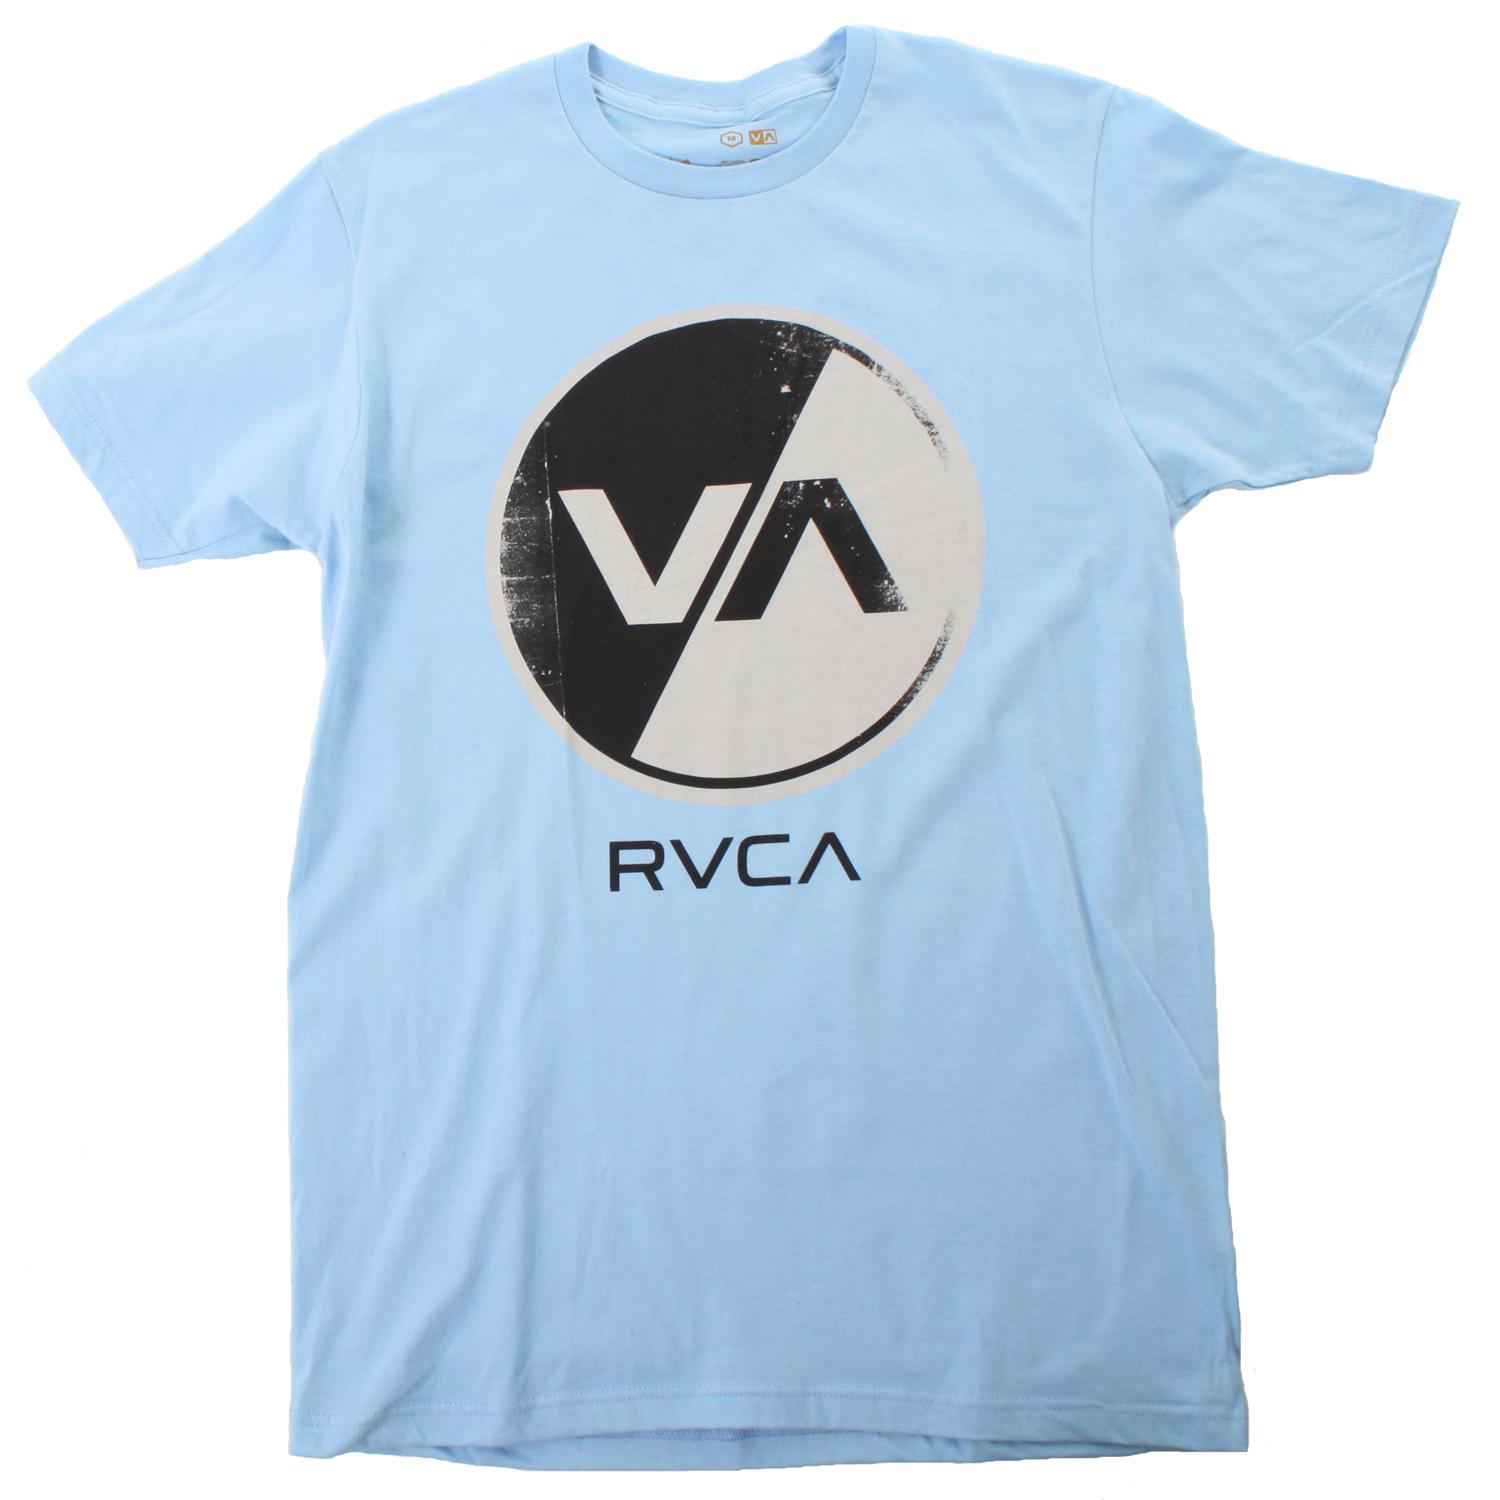 RVCA VA Limited T-Shirt | evo outlet